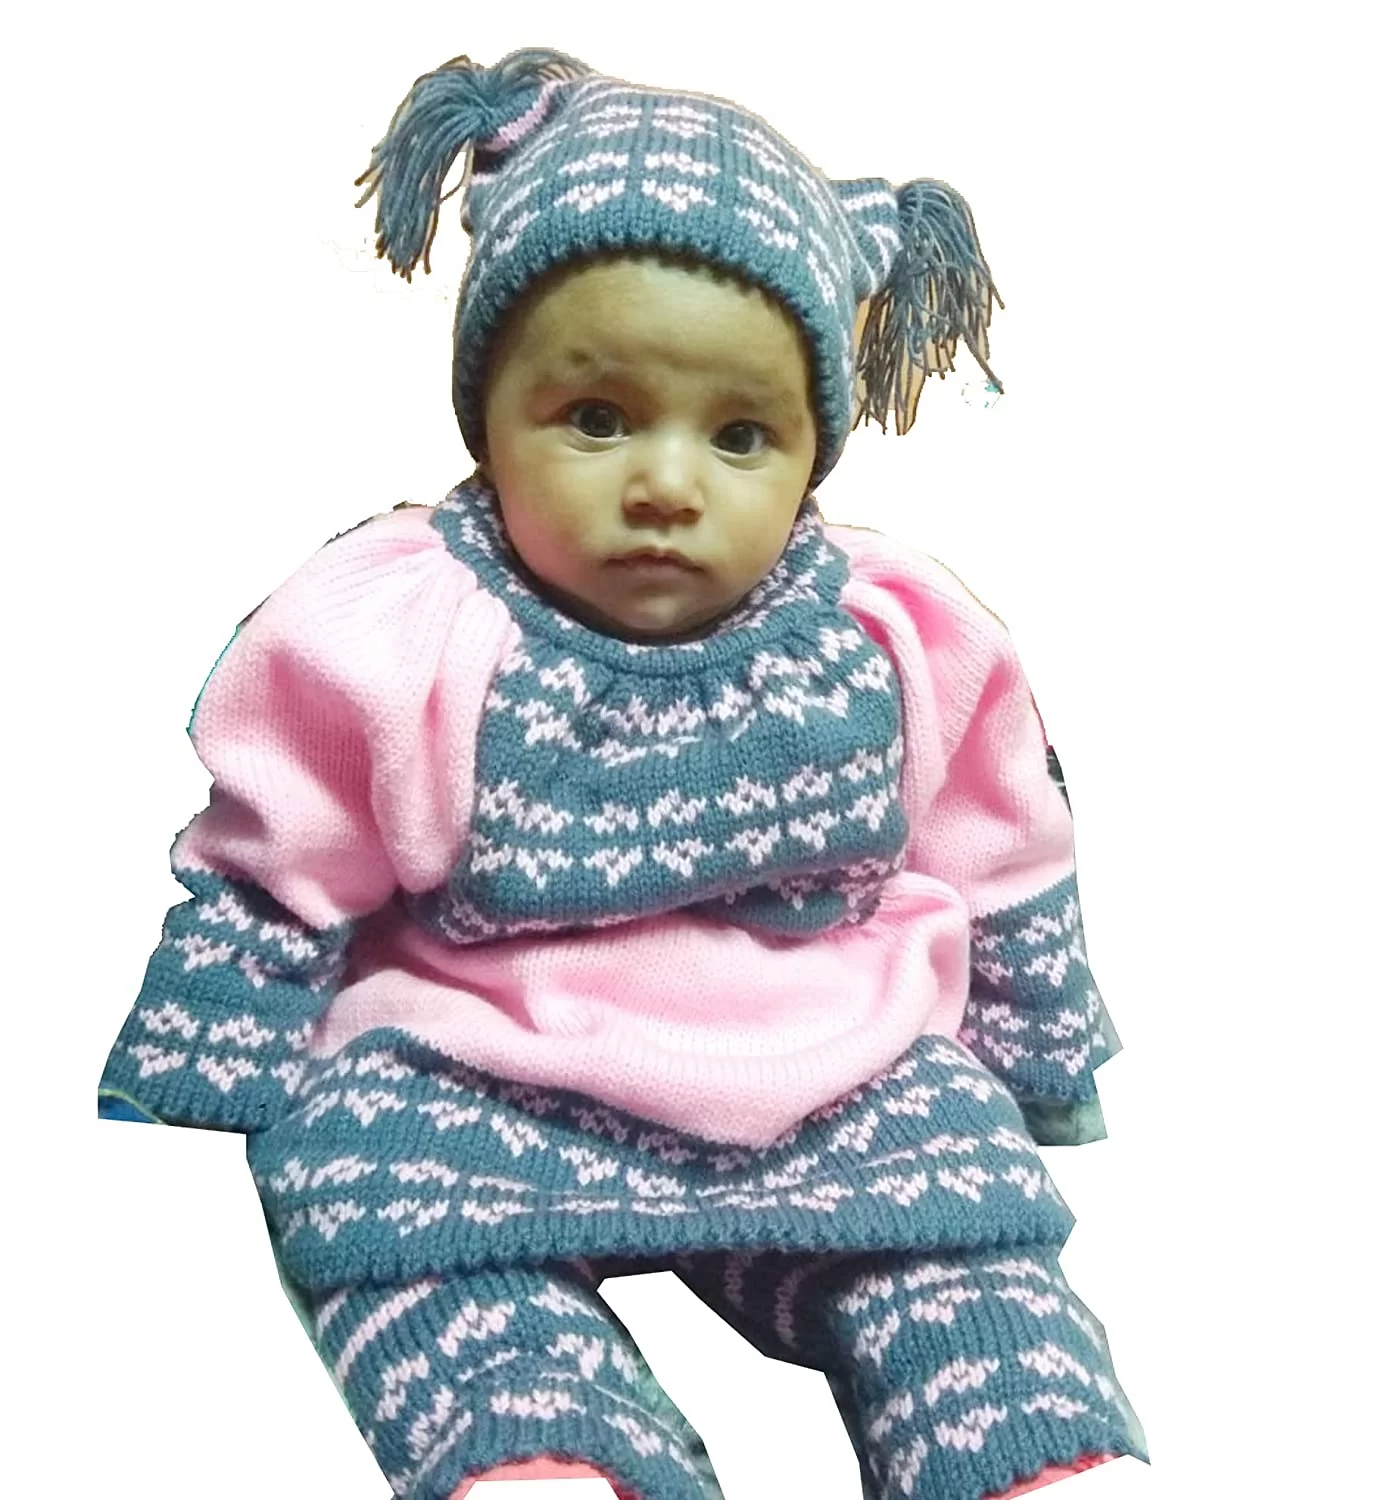 Buy Ritatte GObabyGO Infant Toddler Boys Girls Sweatshirt Set Winter Fall Clothes  Outfit 0-3 Years Old,Baby Plaid Hooded Tops Pants (Gray, 0-6 Months) at  Amazon.in